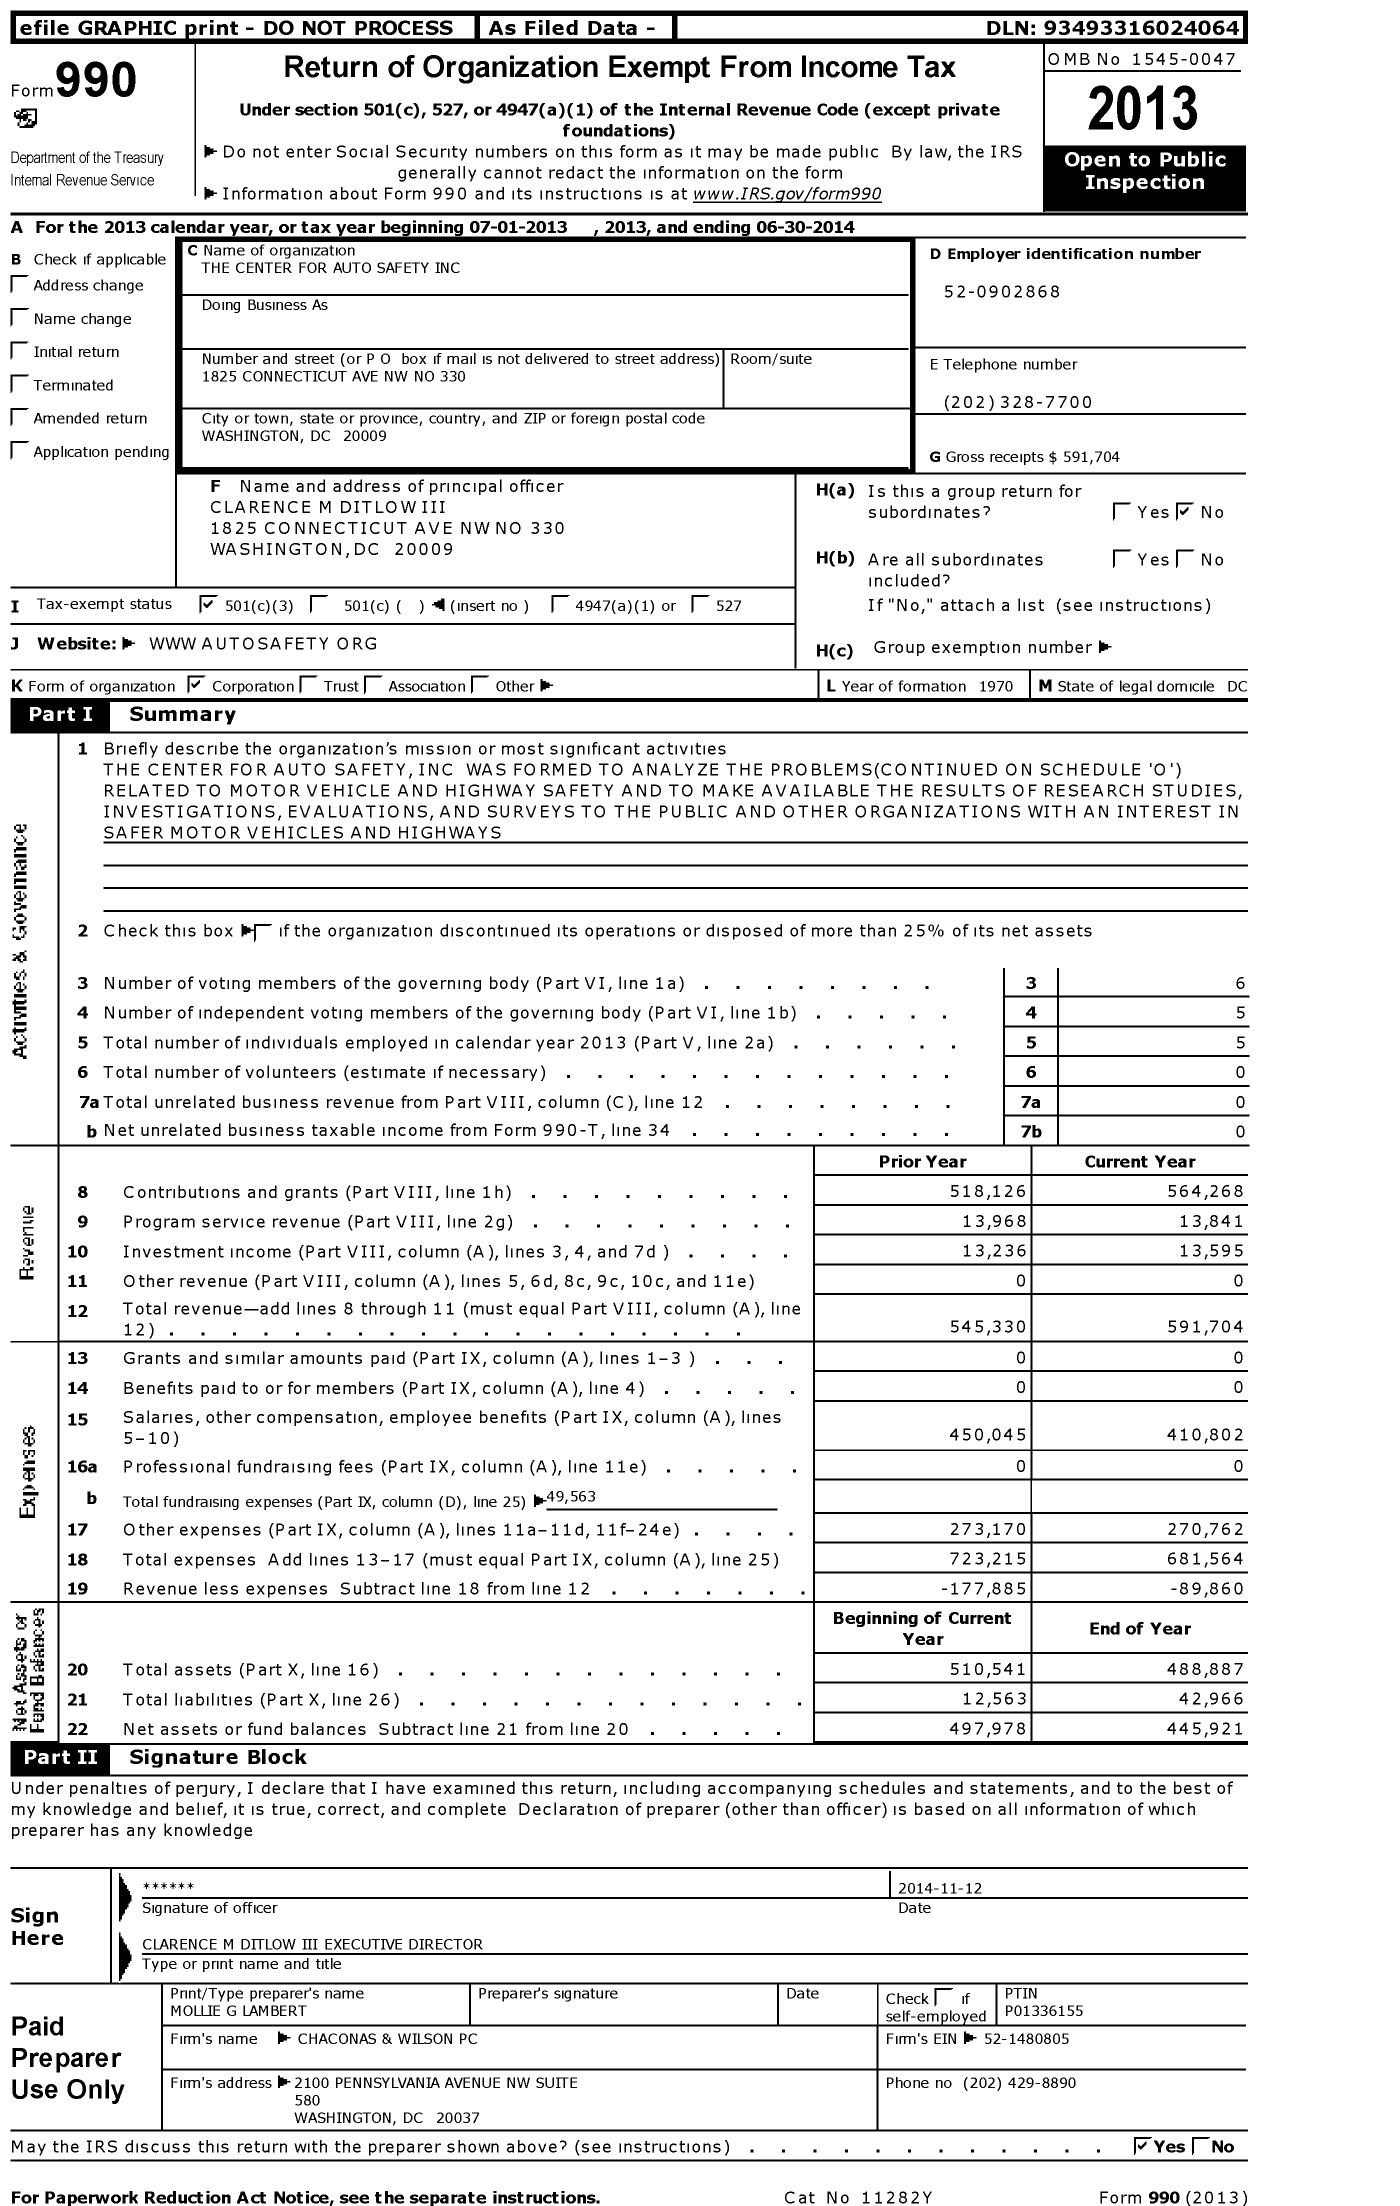 Image of first page of 2013 Form 990 for The Center for Auto Safety